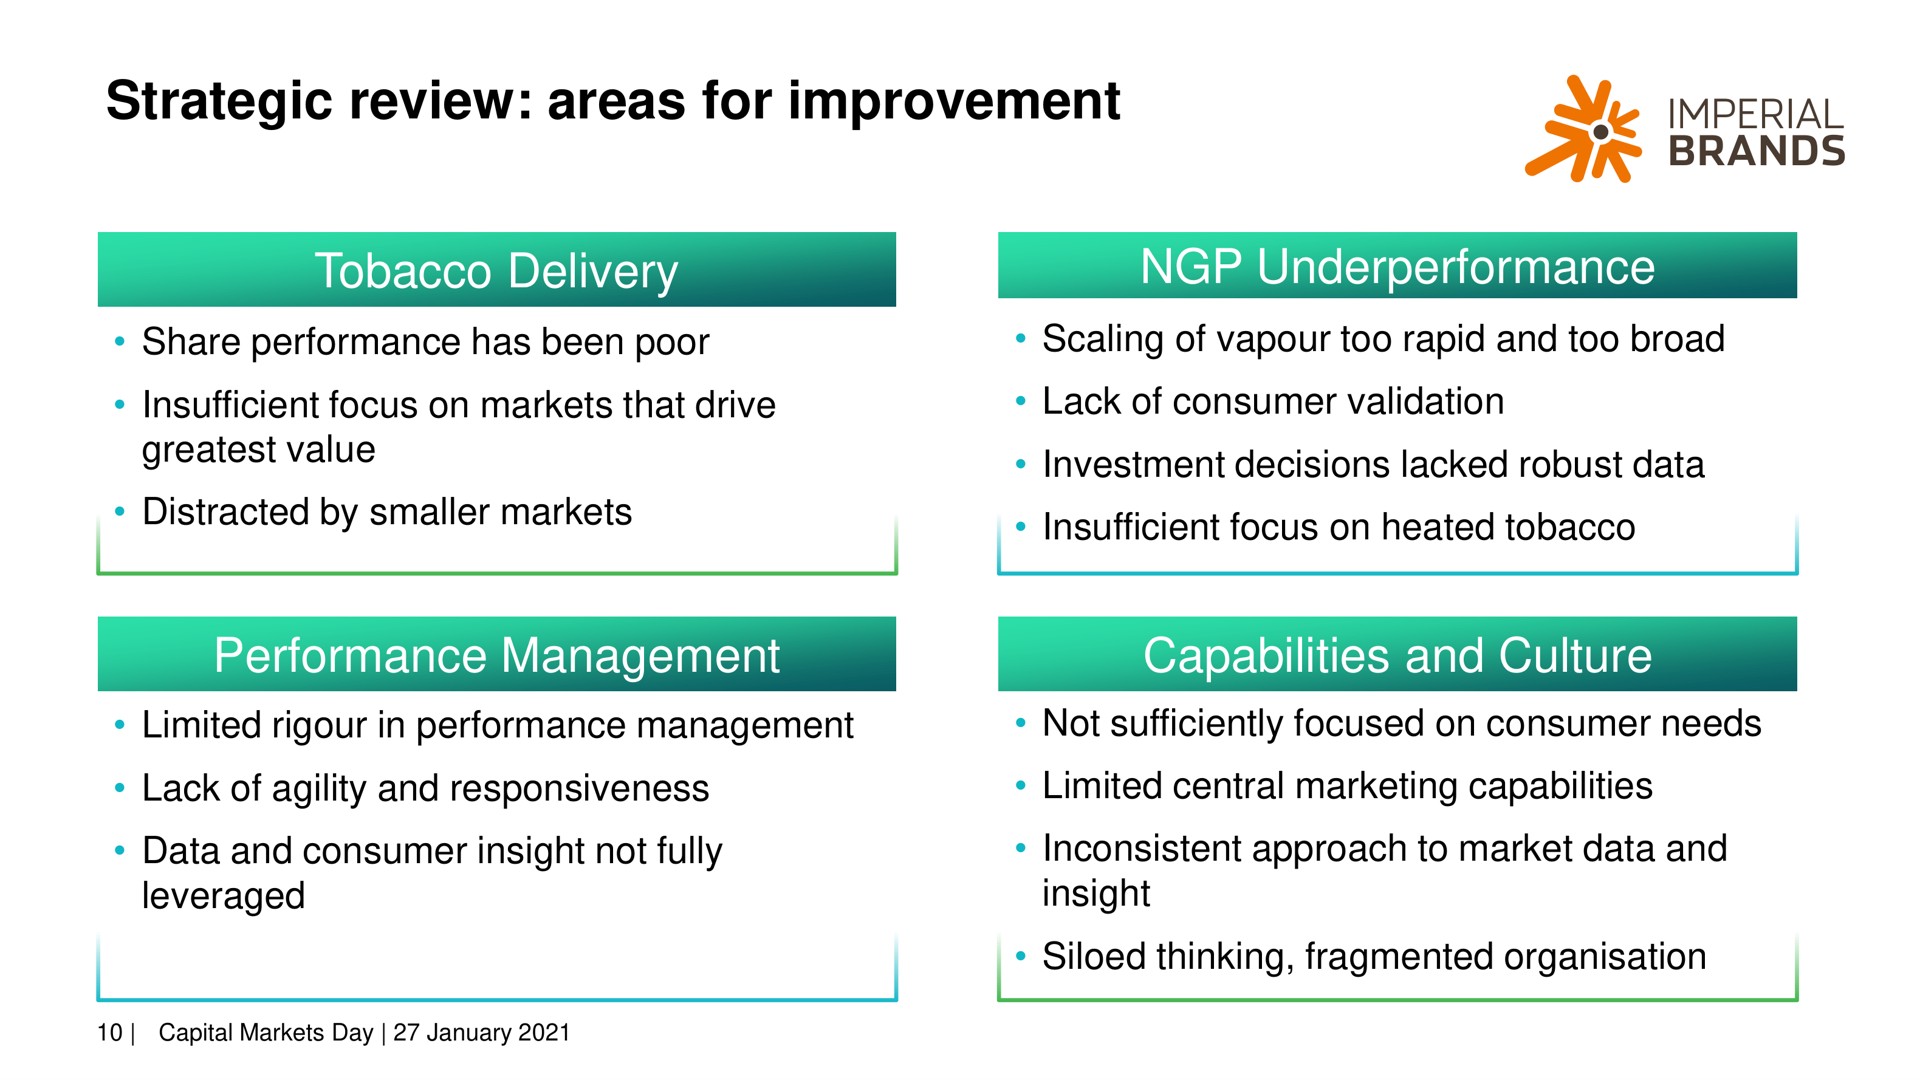 strategic review areas for improvement imperial brands | Imperial Brands